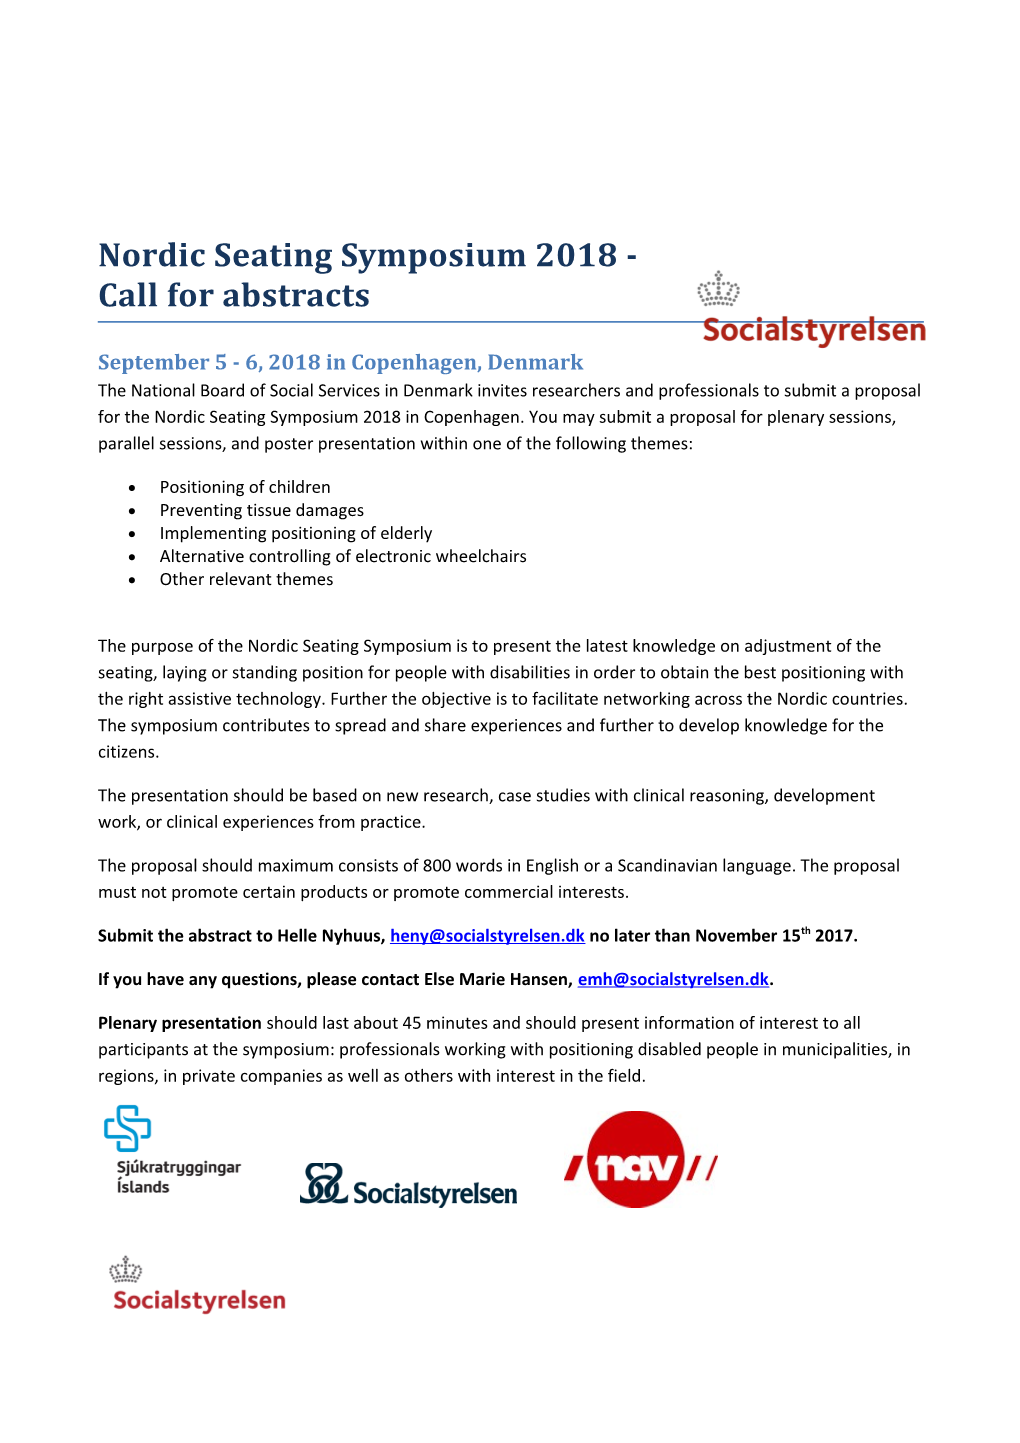 Nordic Seating Symposium 2018 - Call for Abstracts